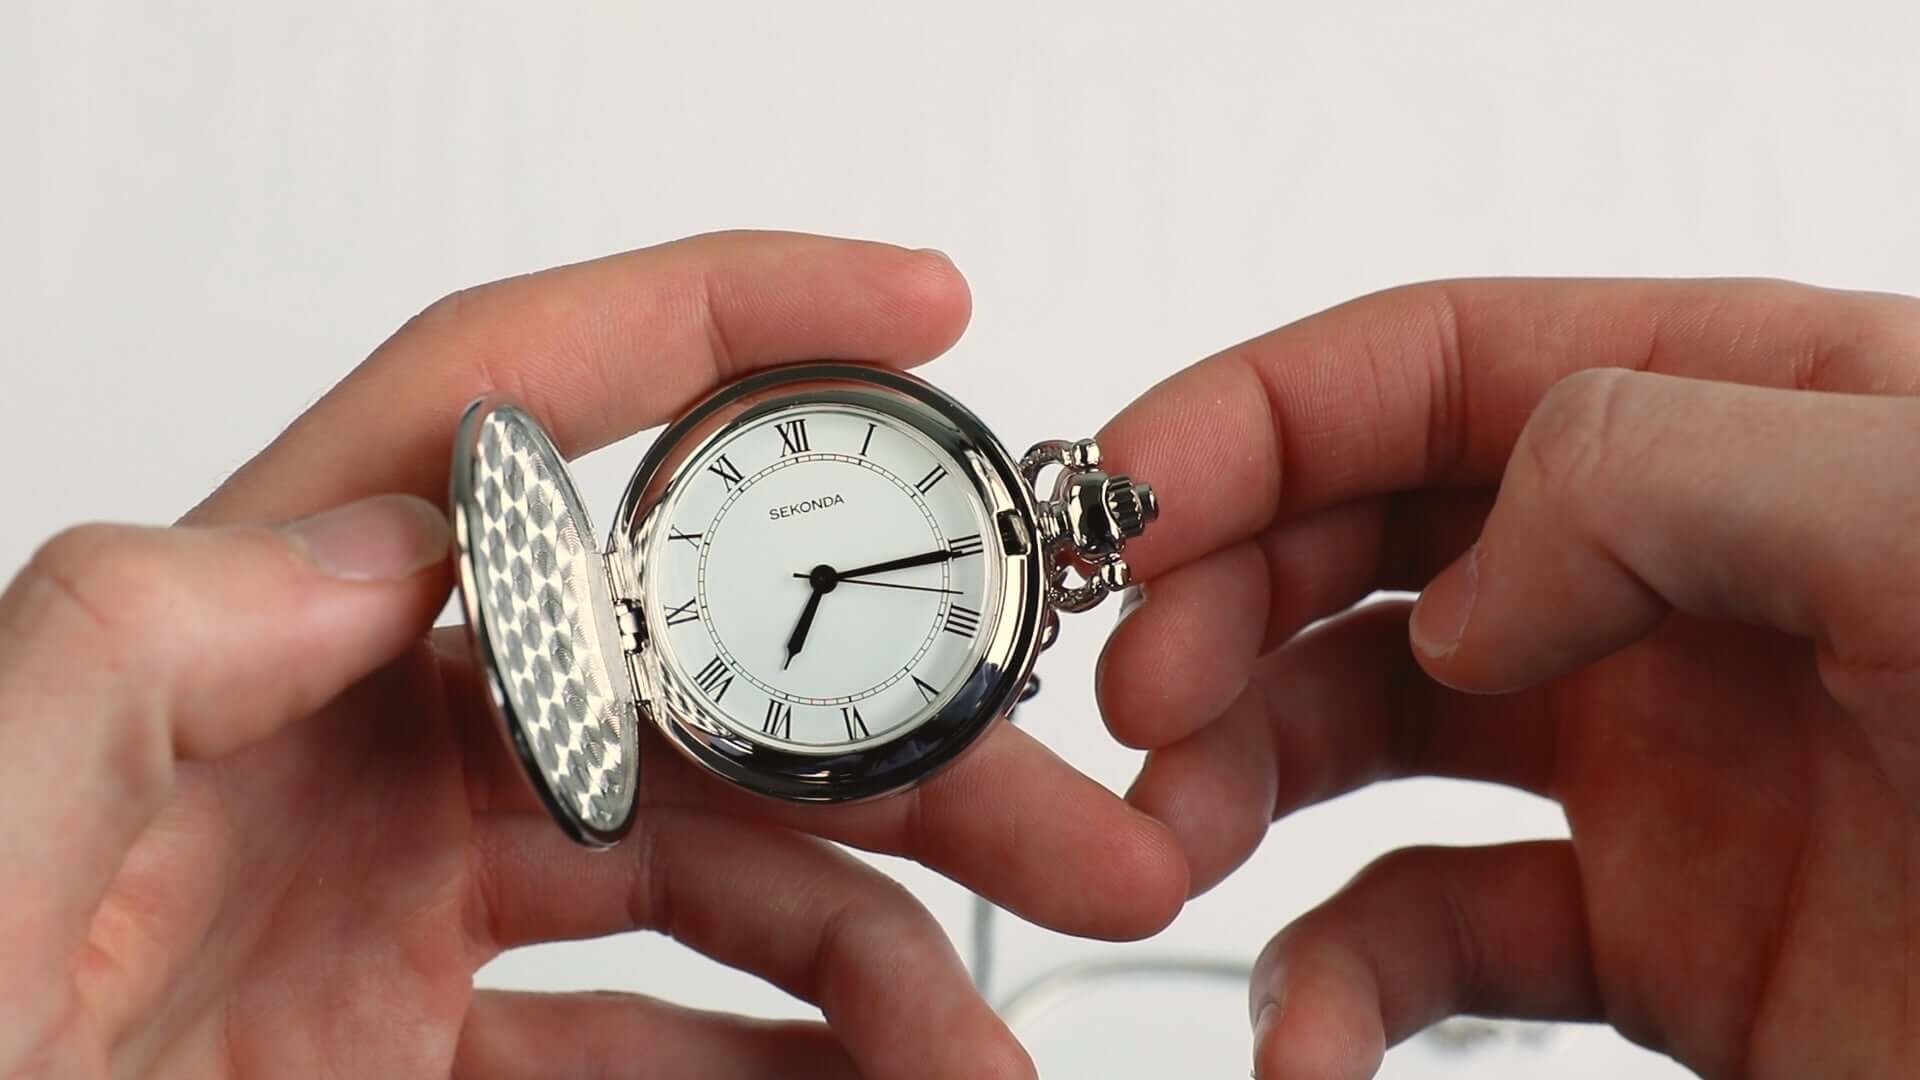 How To Change The Time On A Pocket Watch